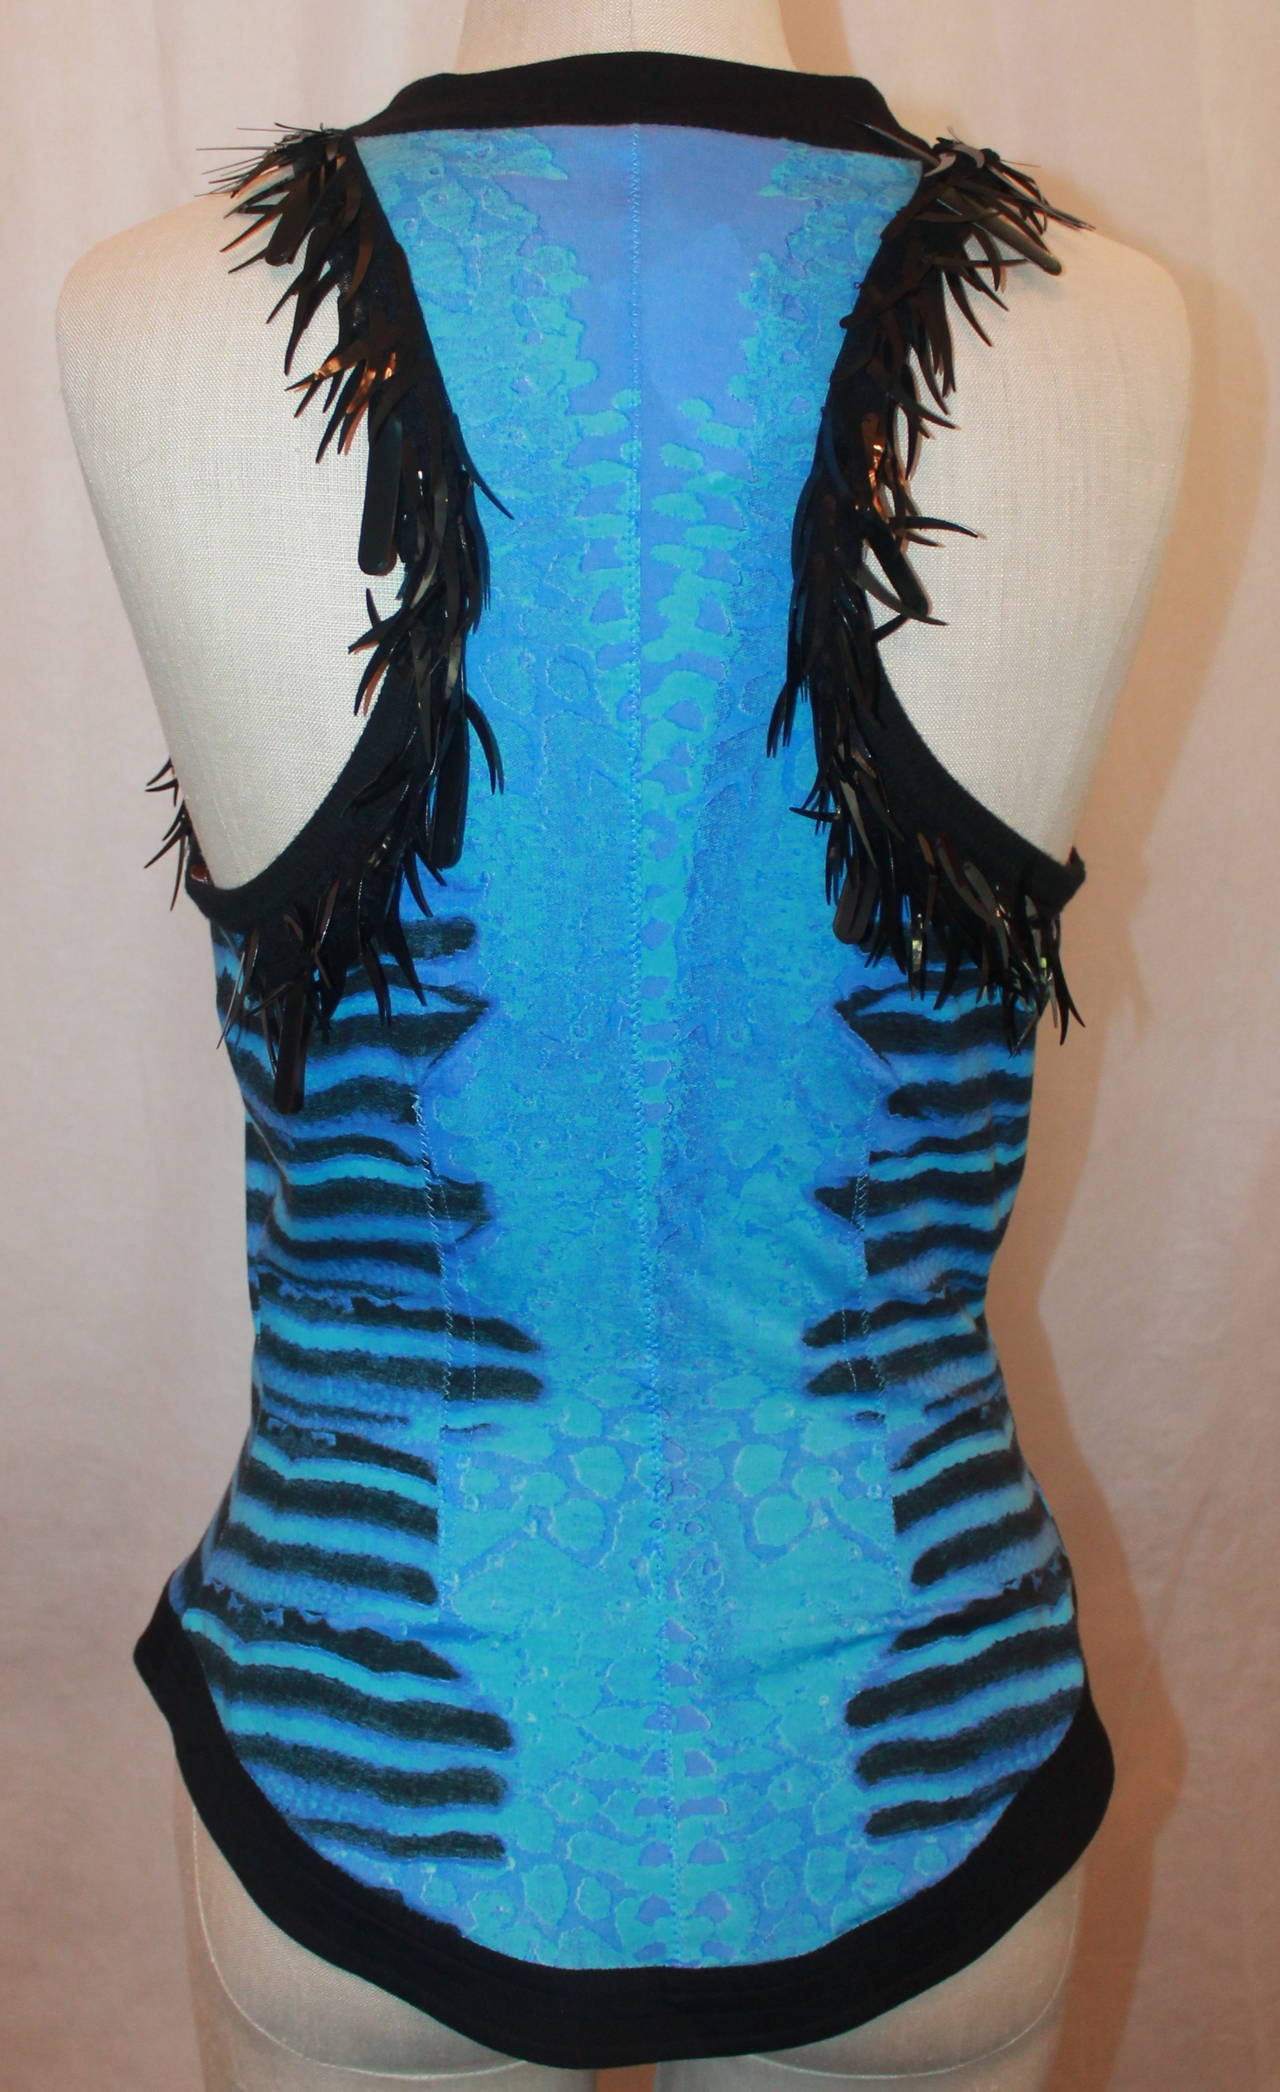 Roberto Cavalli Blue and Black Sleeveless Cotton Top - 42 For Sale 1